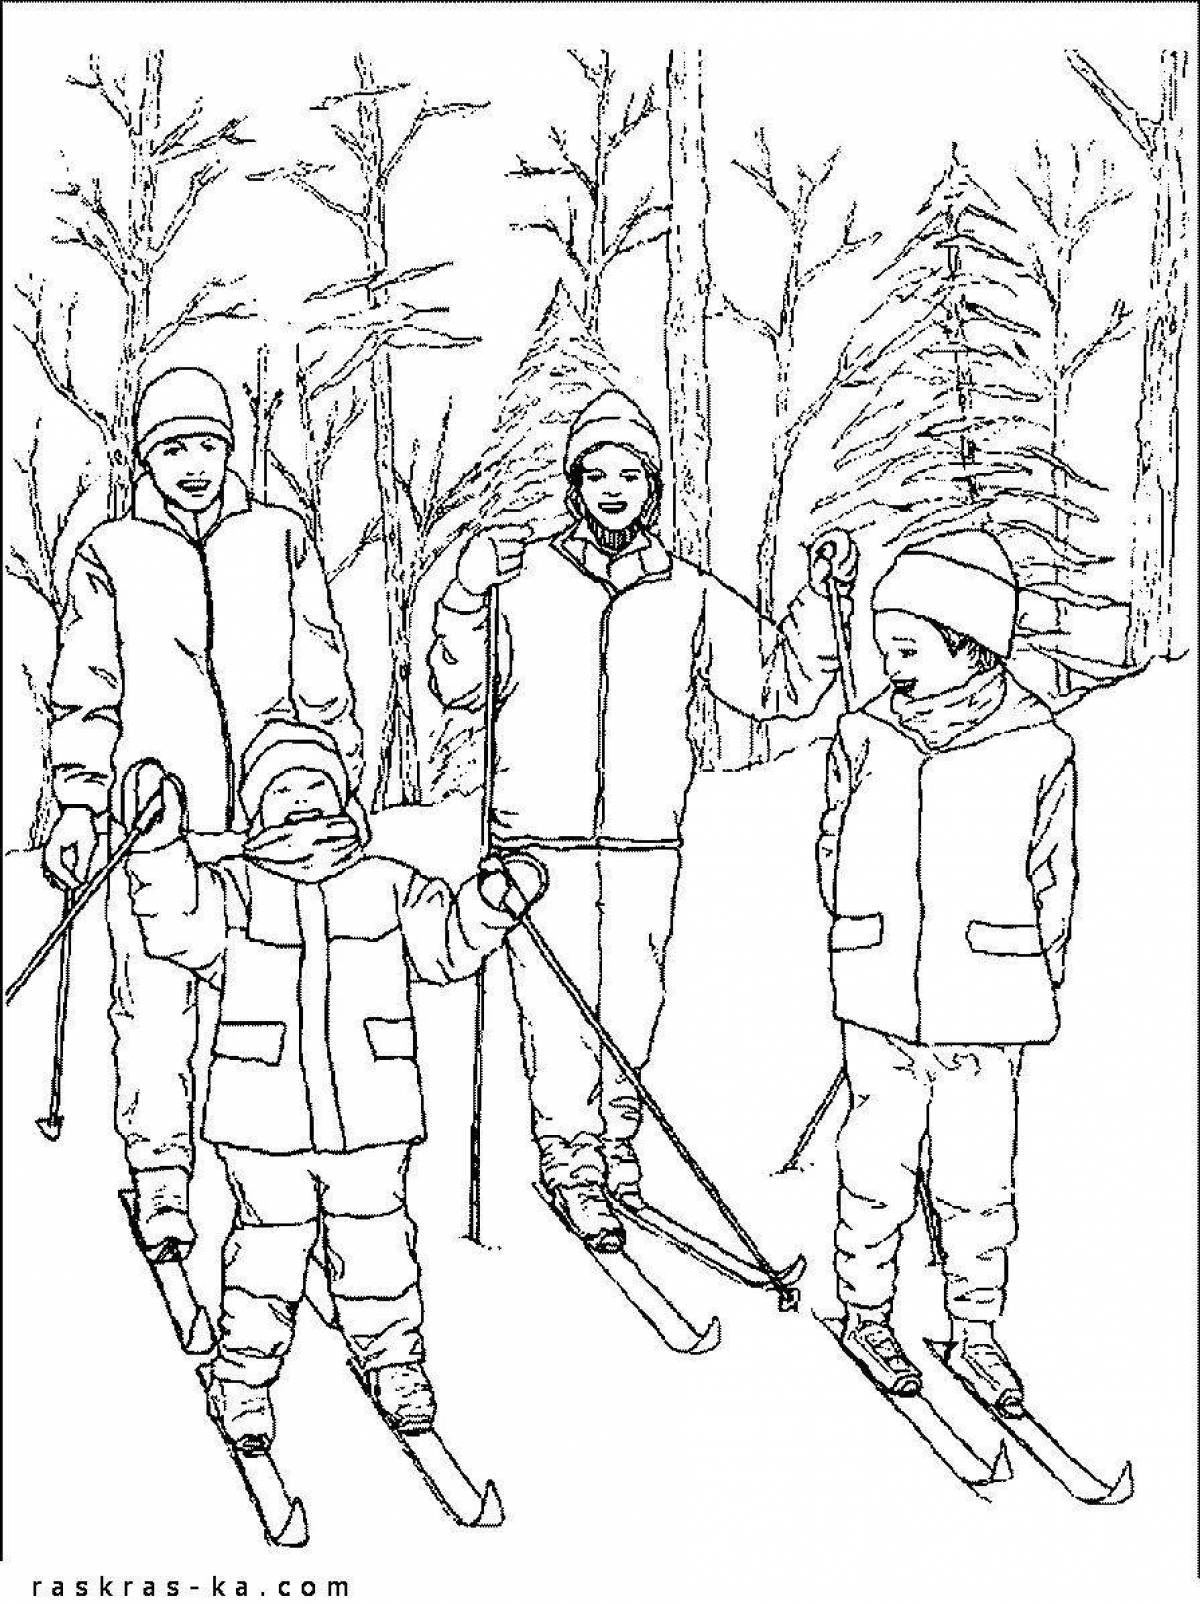 Awesome coloring book for skiing